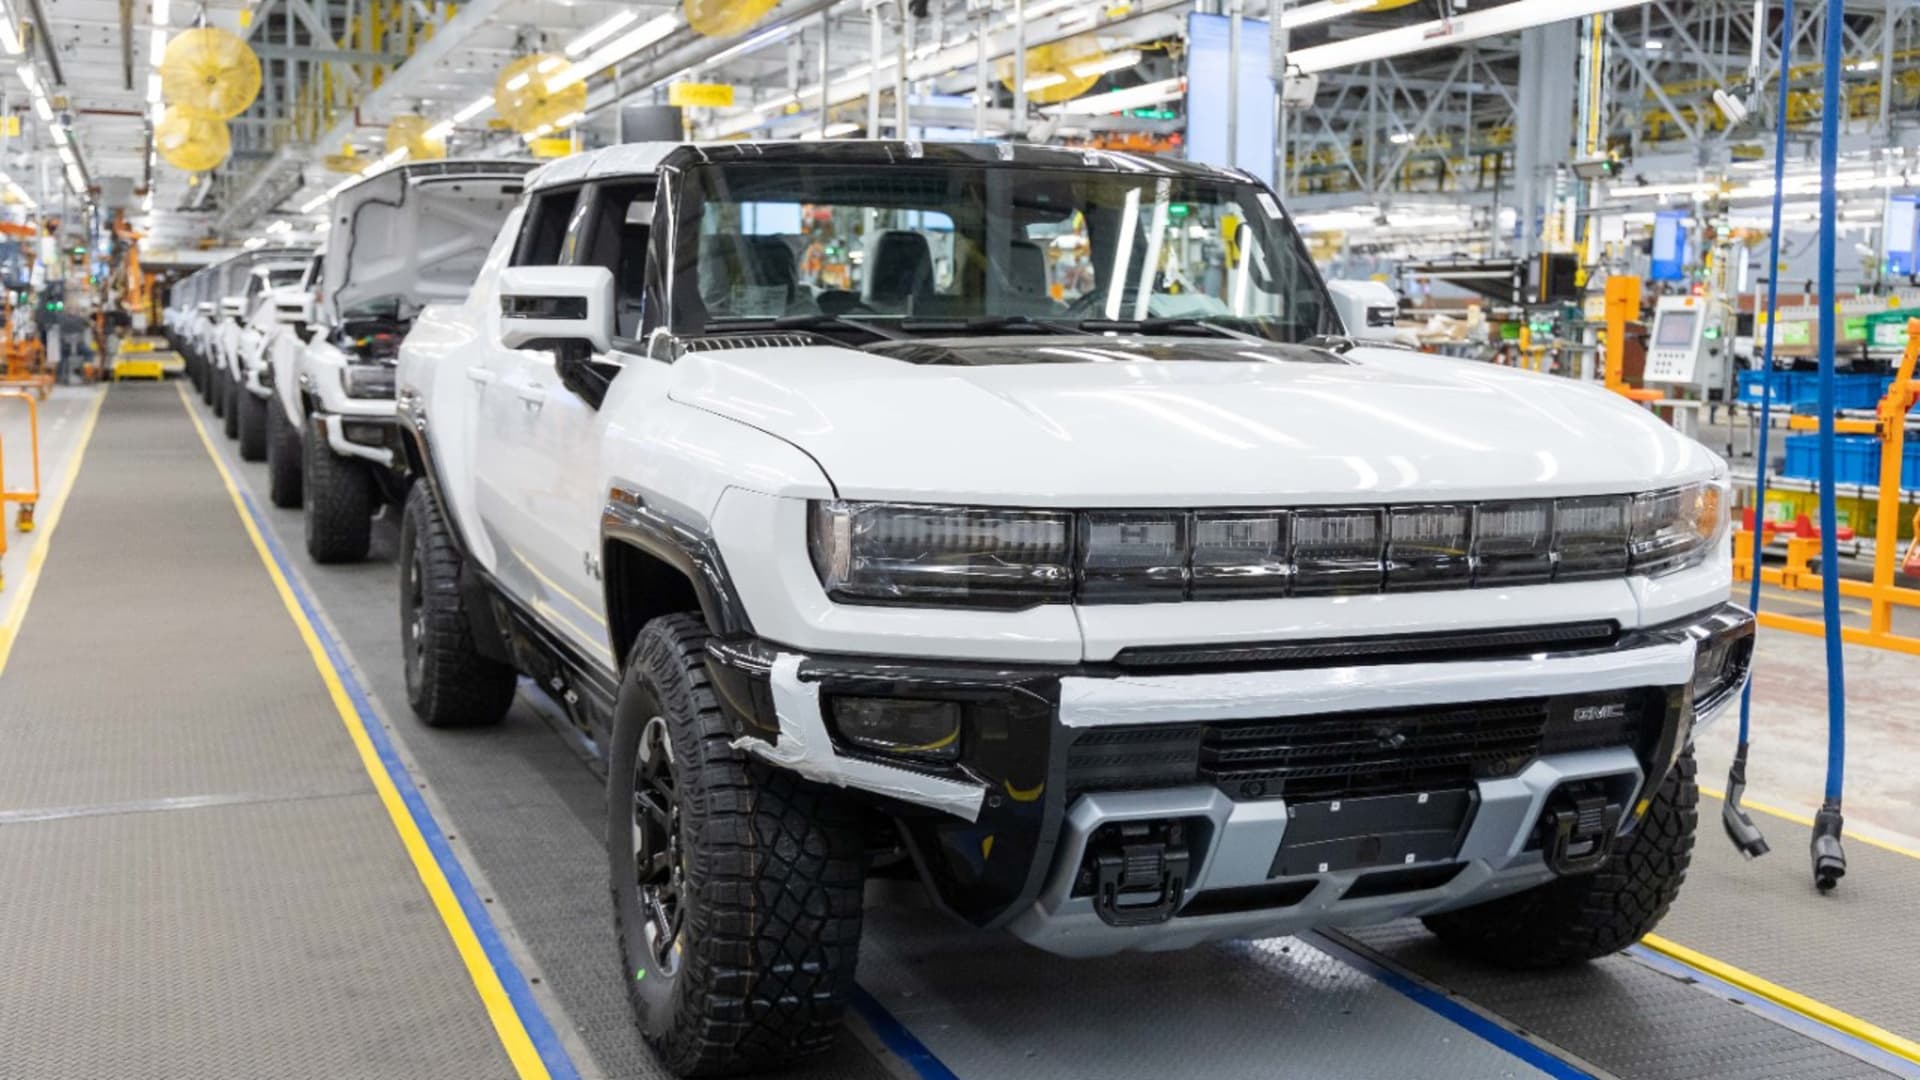 GM to close reservations for electric Hummer pickup, SUV after topping 90,000